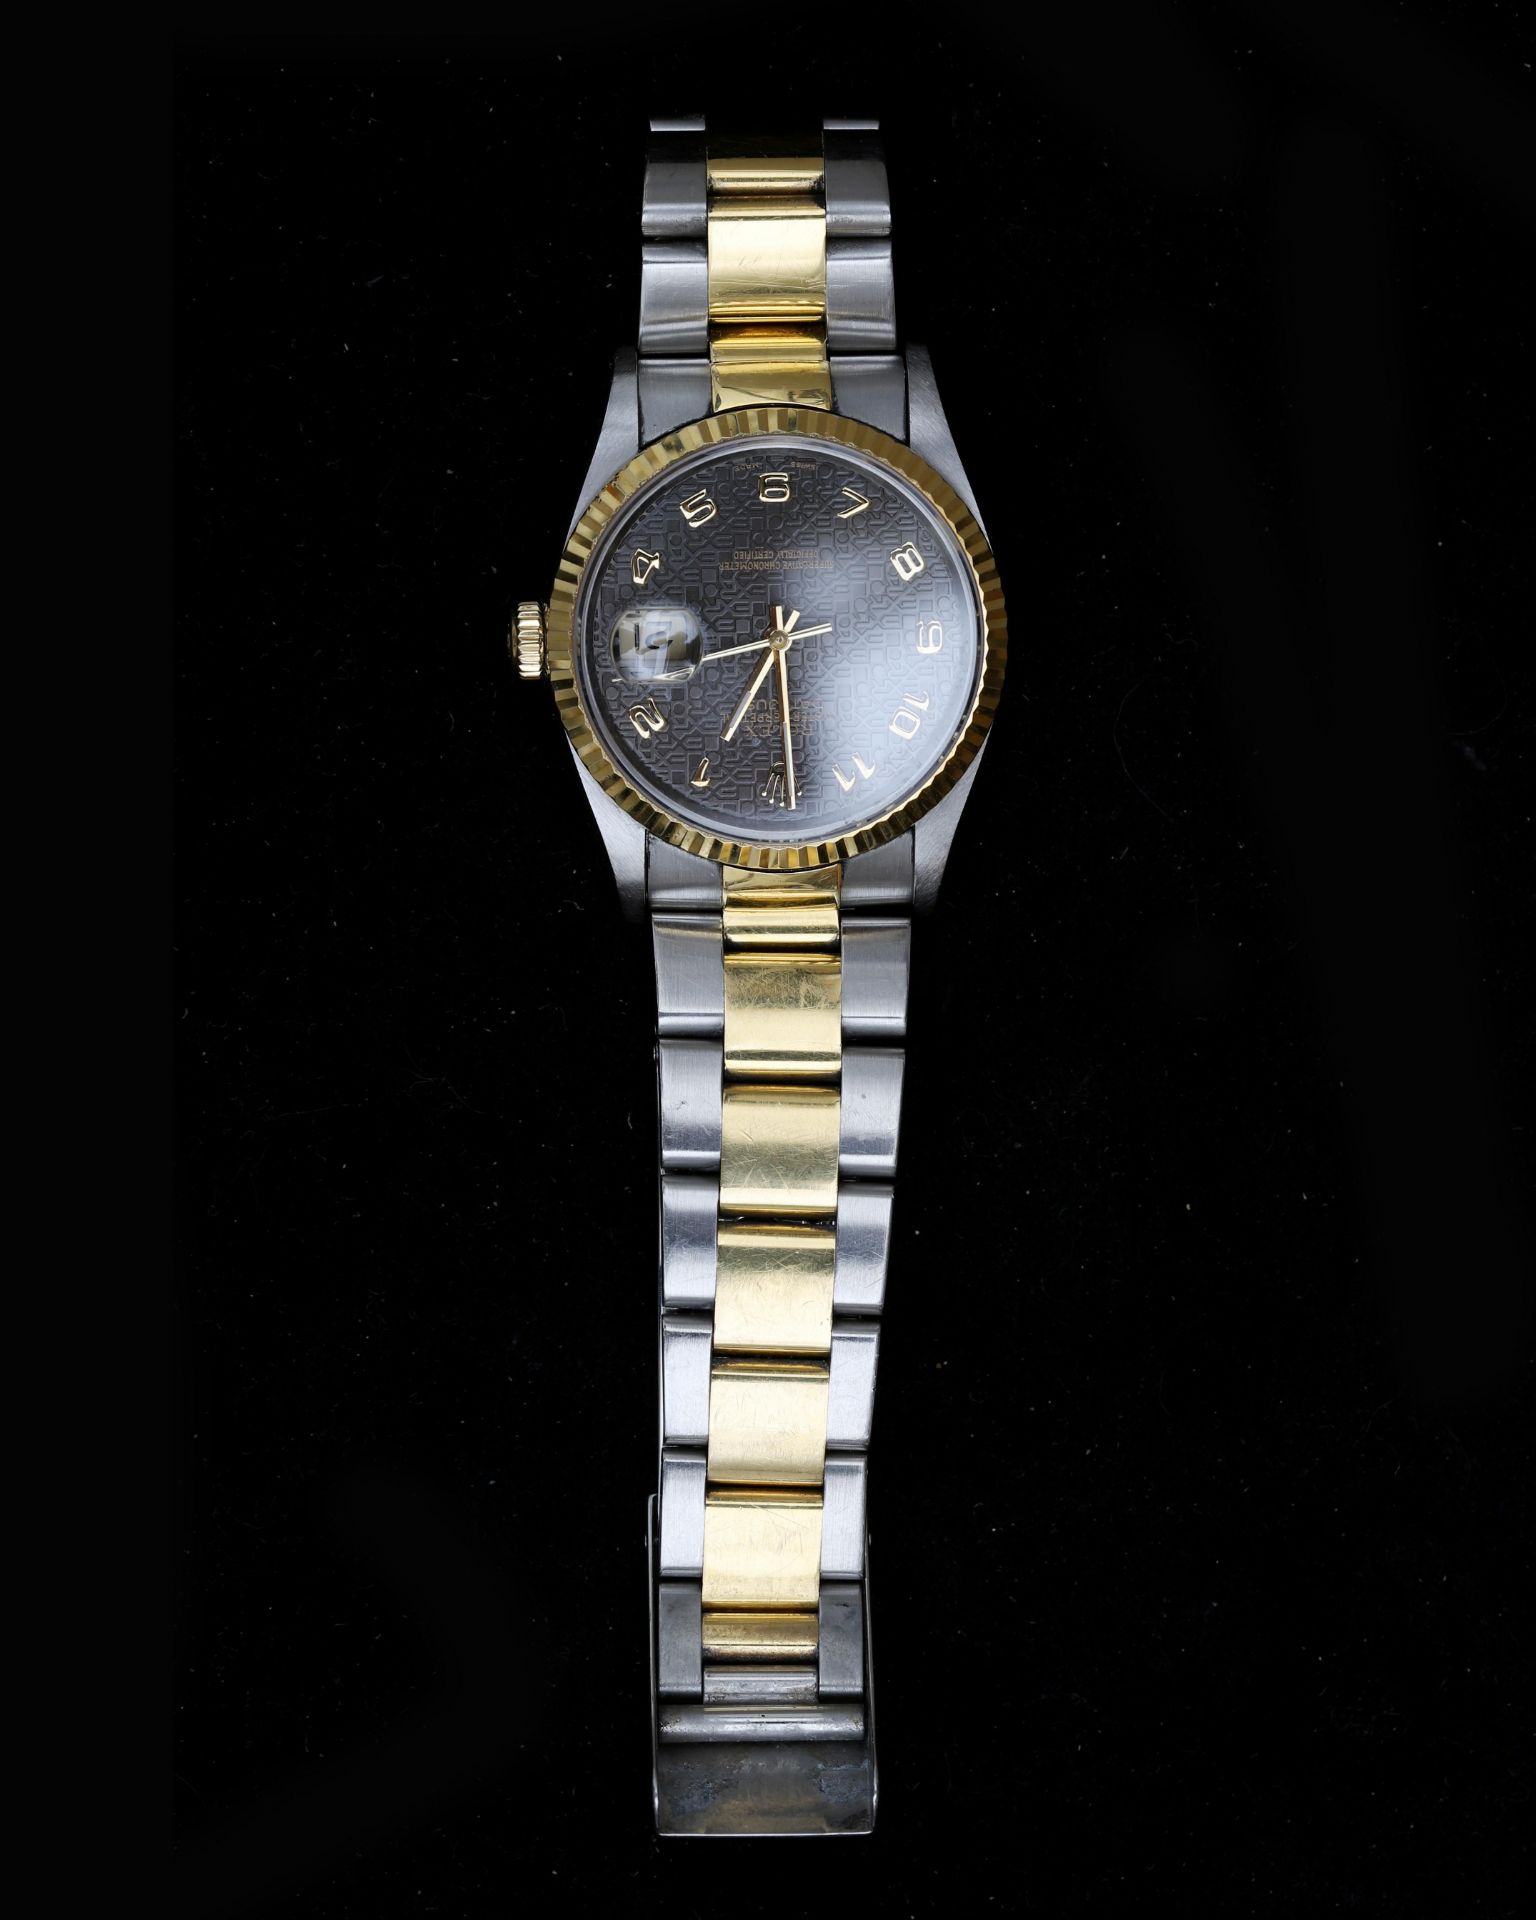 A bi-color unisex Rolex Datejust Oyster Perpetual wristwatch - Image 2 of 9